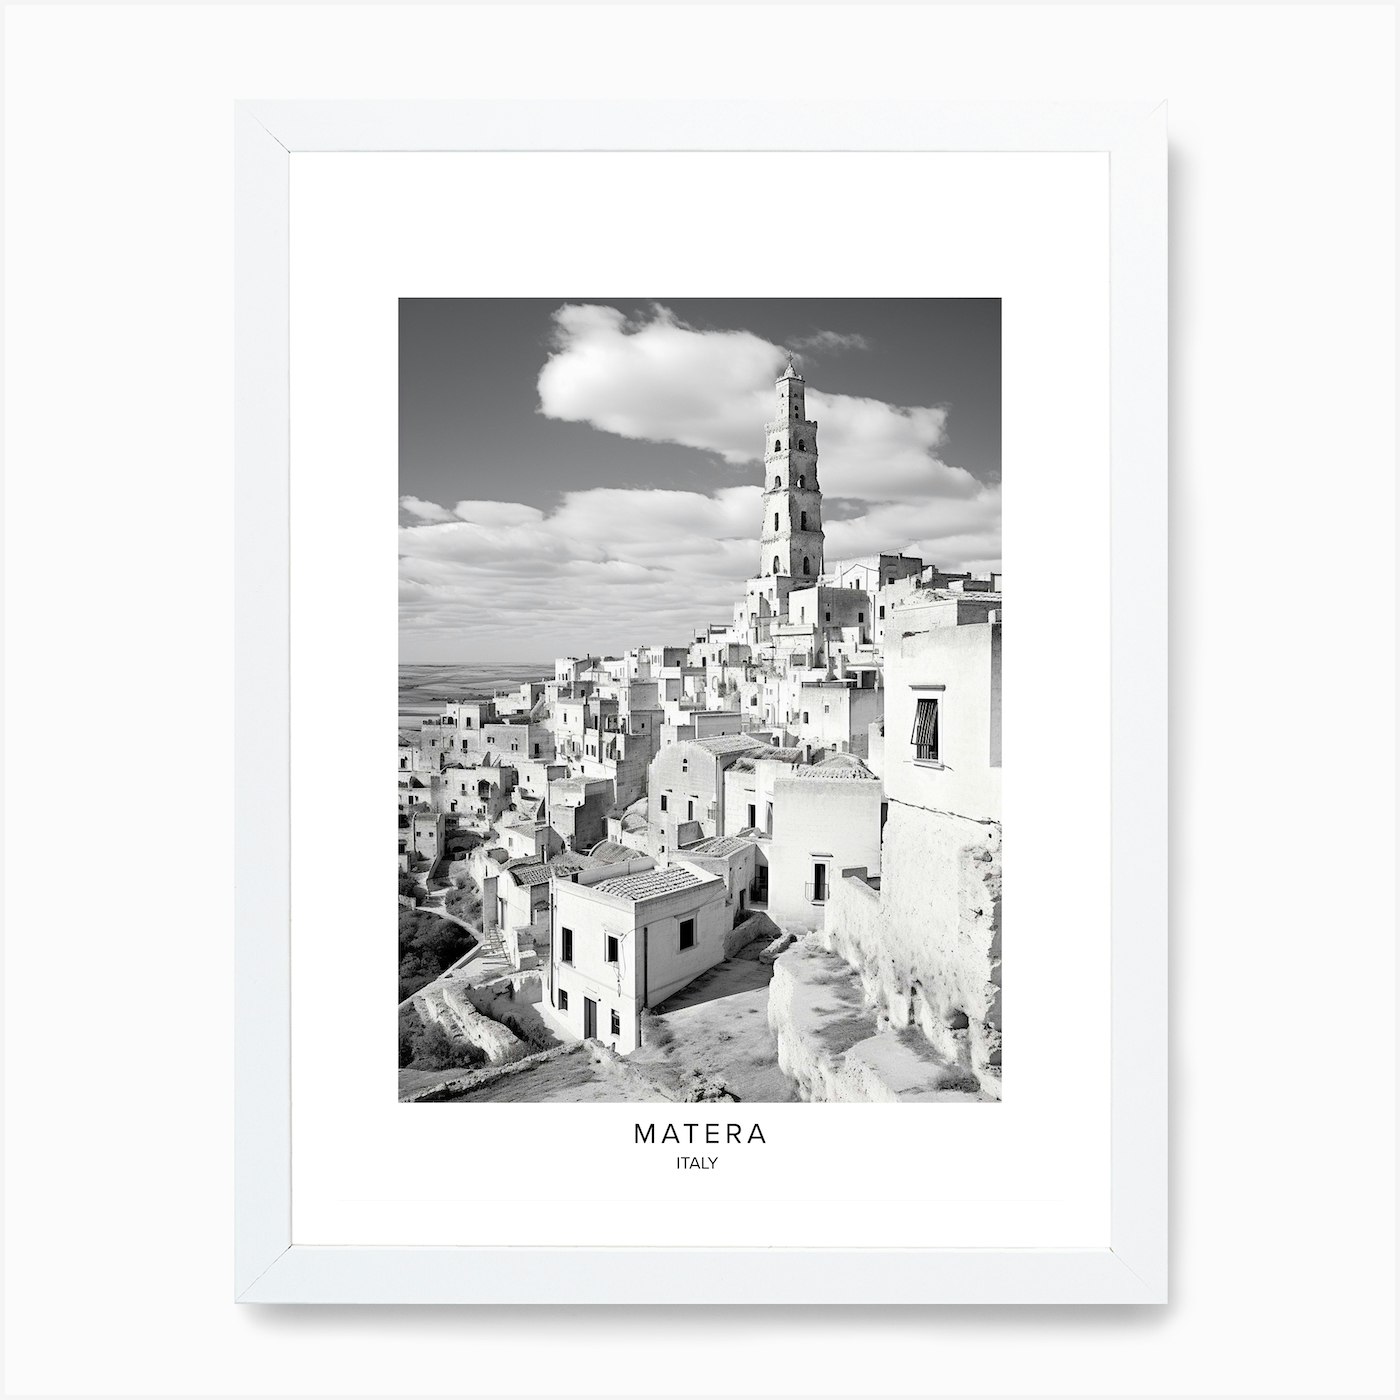 Poster Of Matera, Italy, Black And White Analogue Photography 4 Art Print  by Monochrome Vistas - Fy | Poster